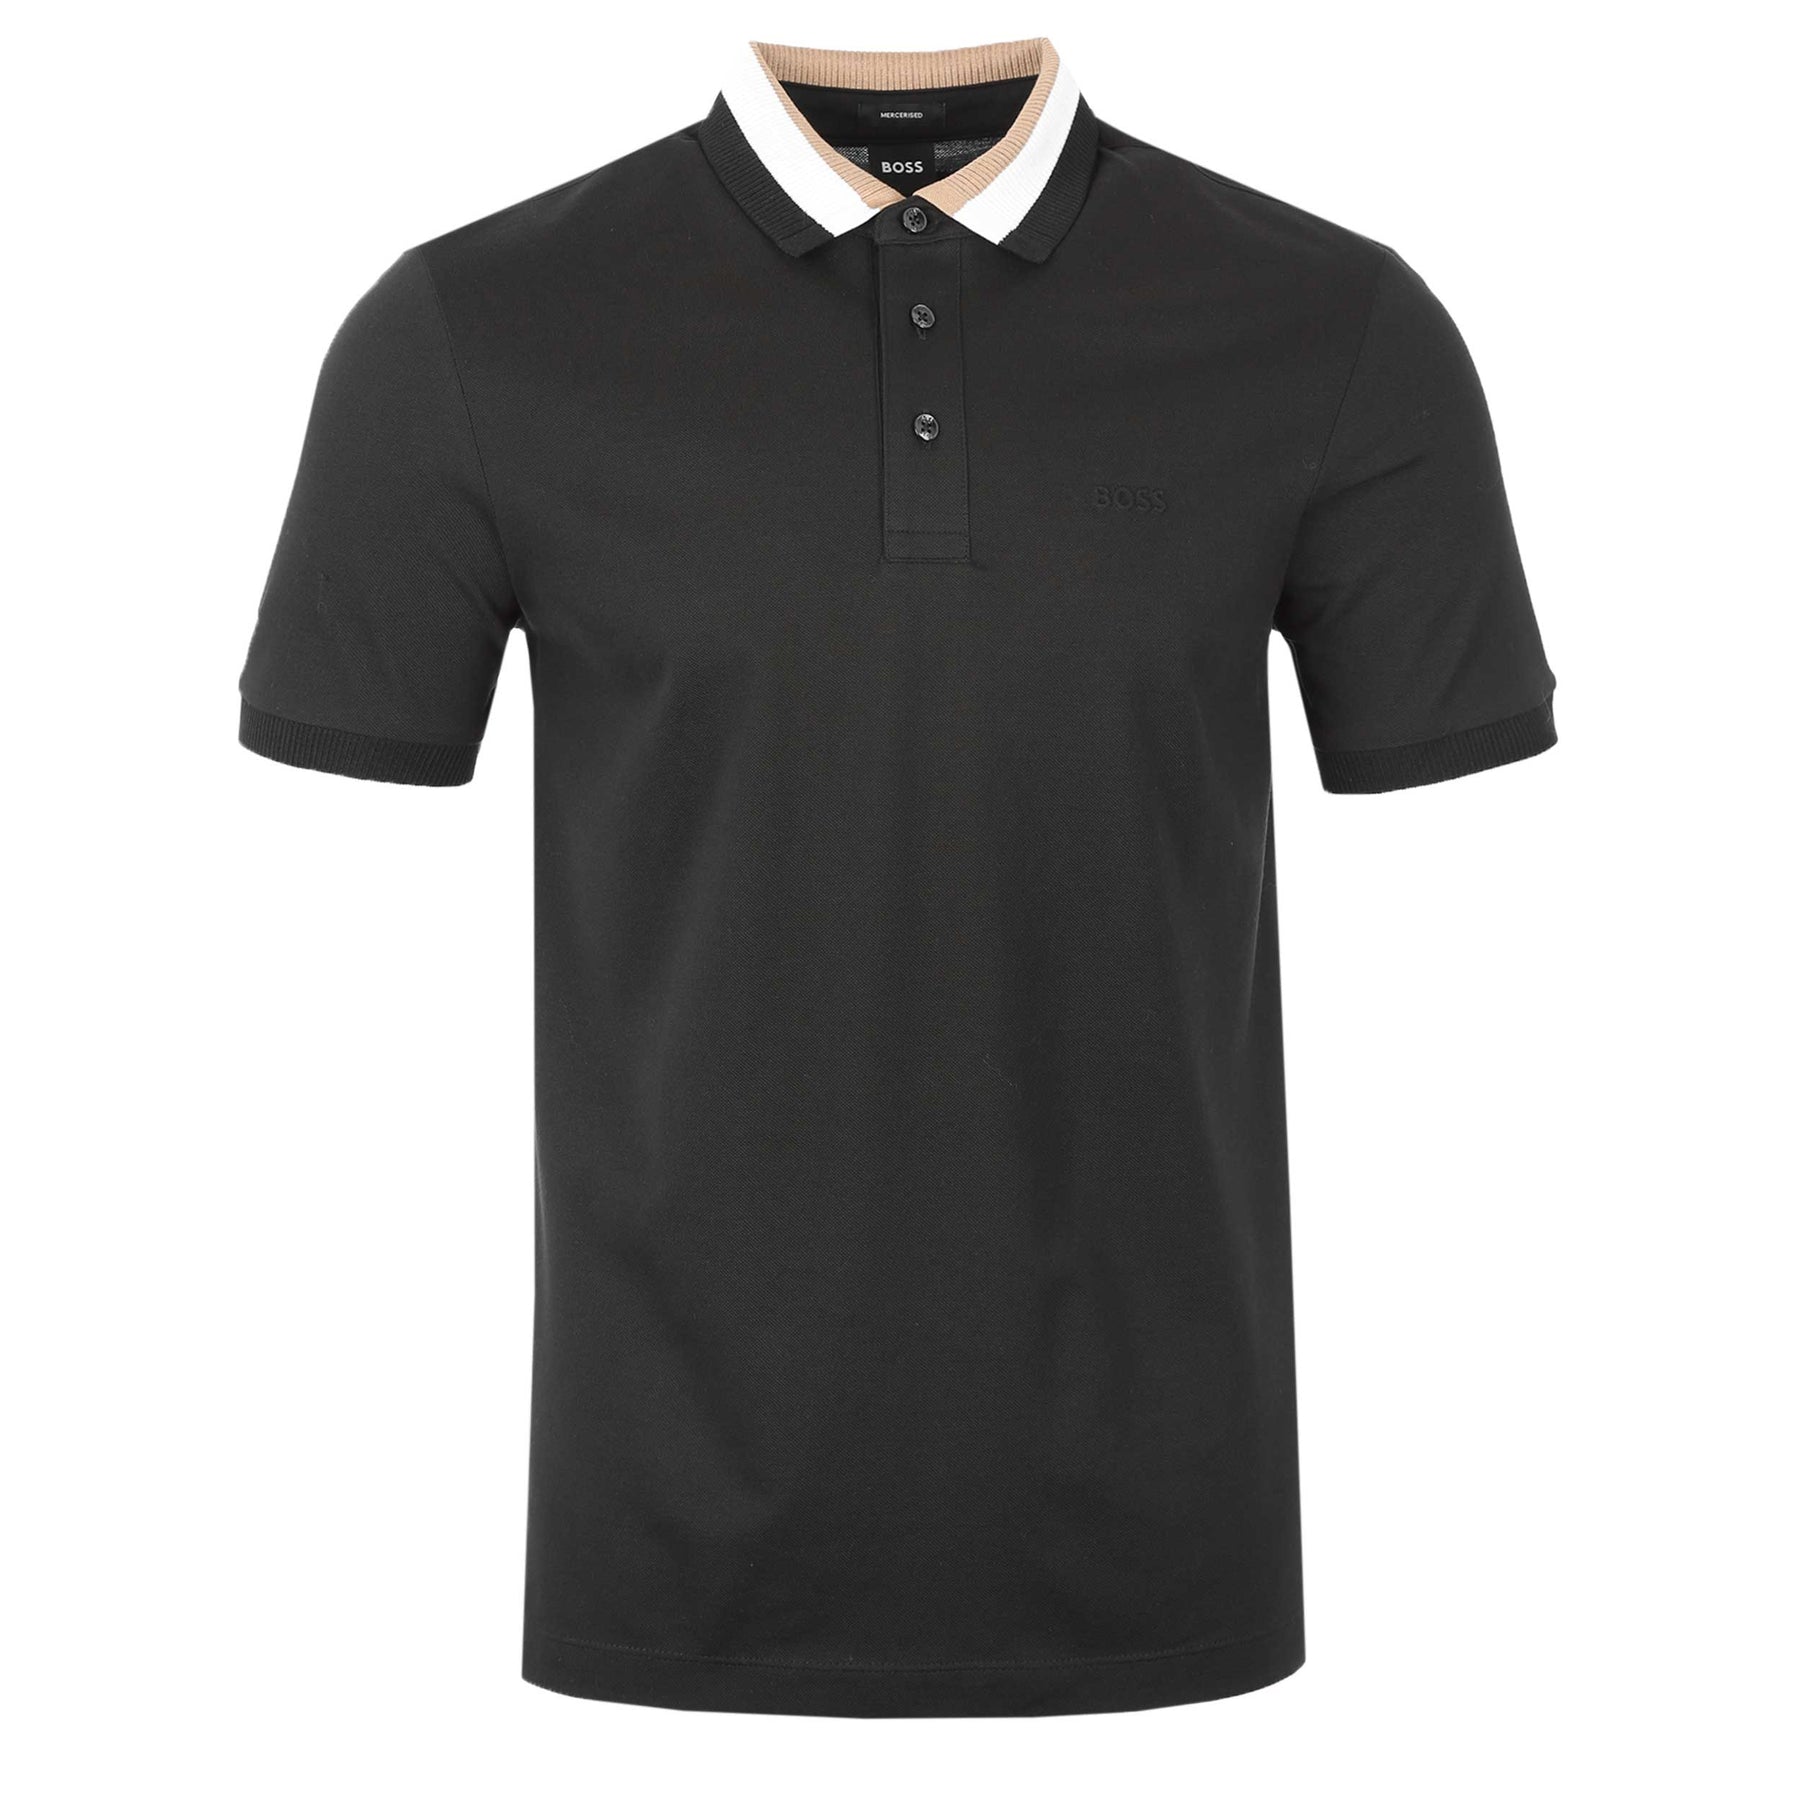 BOSS Prout 37 Polo Shirt in Black | BOSS | Norton Barrie